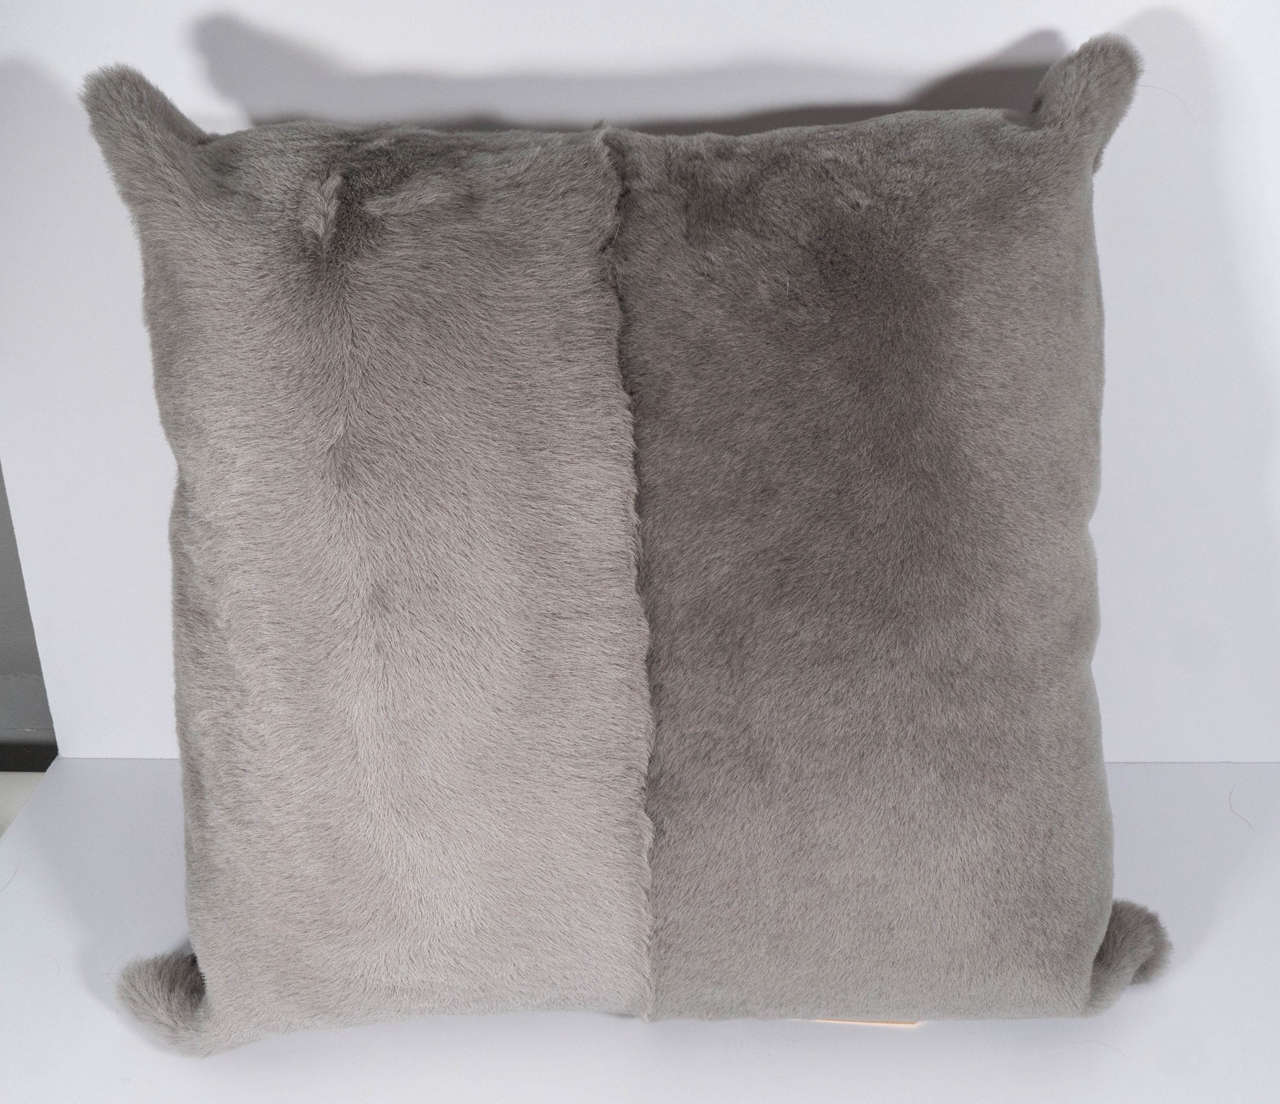 Genuine full skin sheared goatskin pillow in pale grey with leather backing.